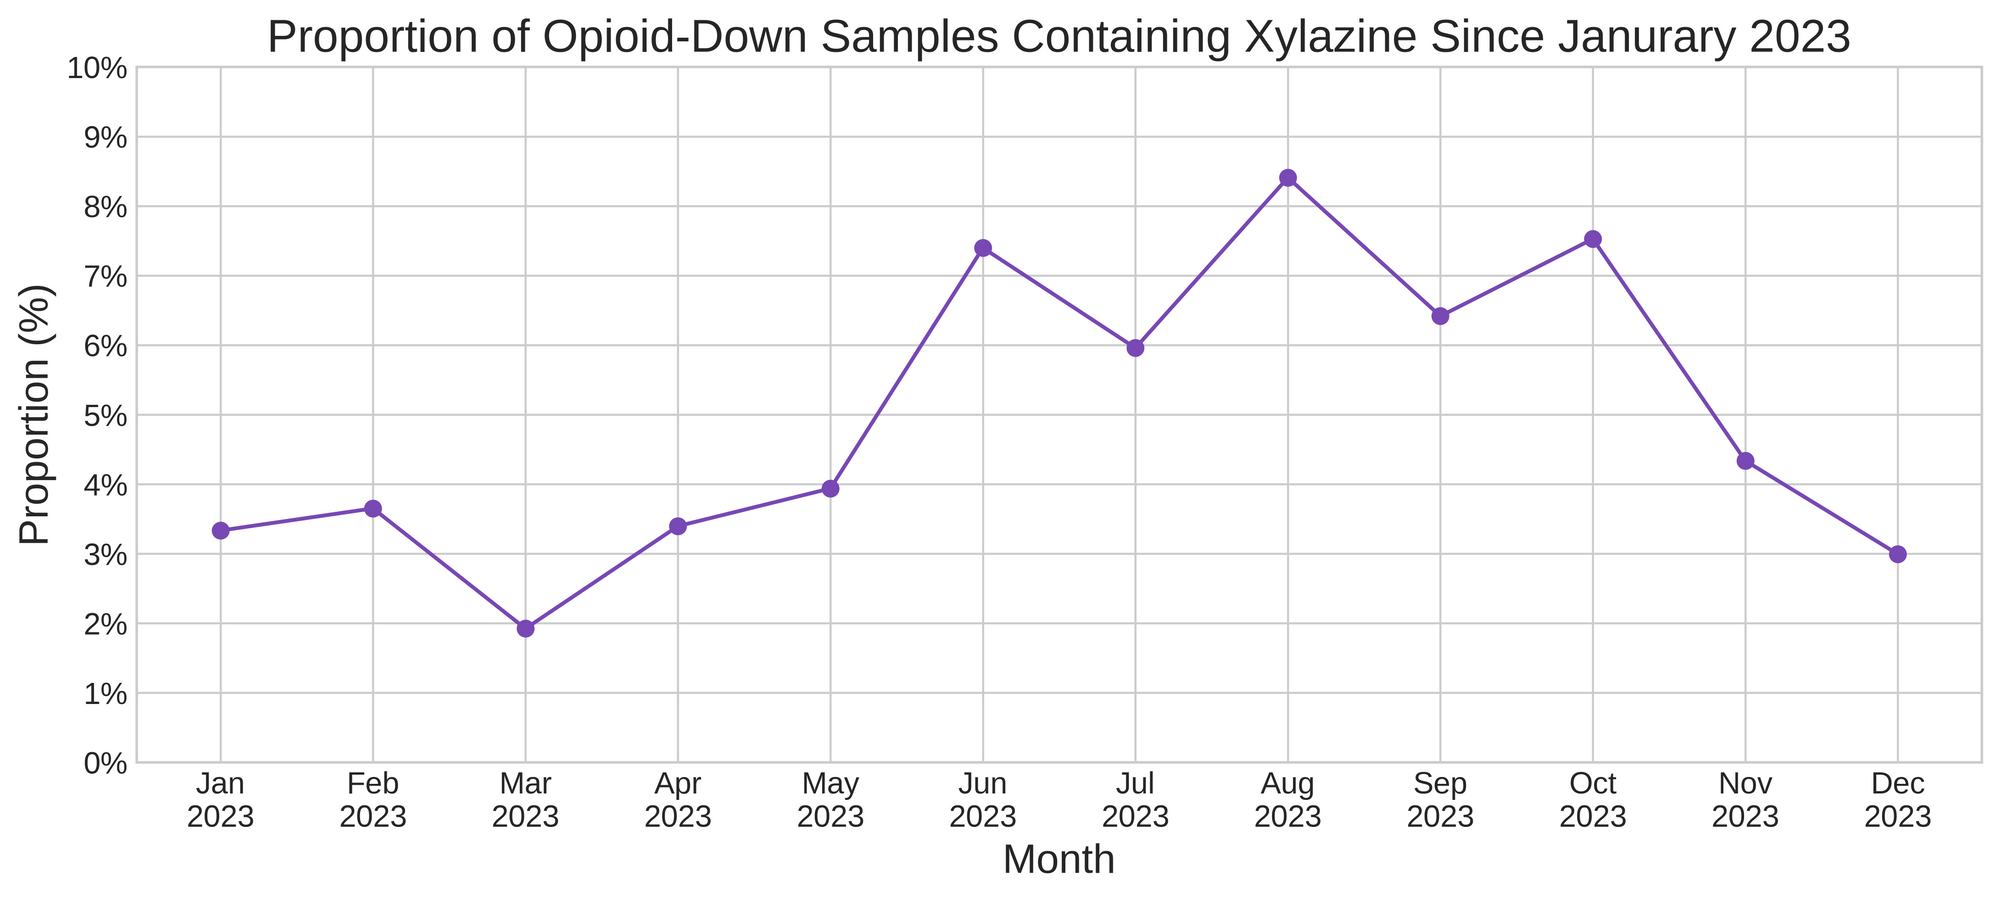 The proportion of expected opioid - down samples containing xylazine since July 2023